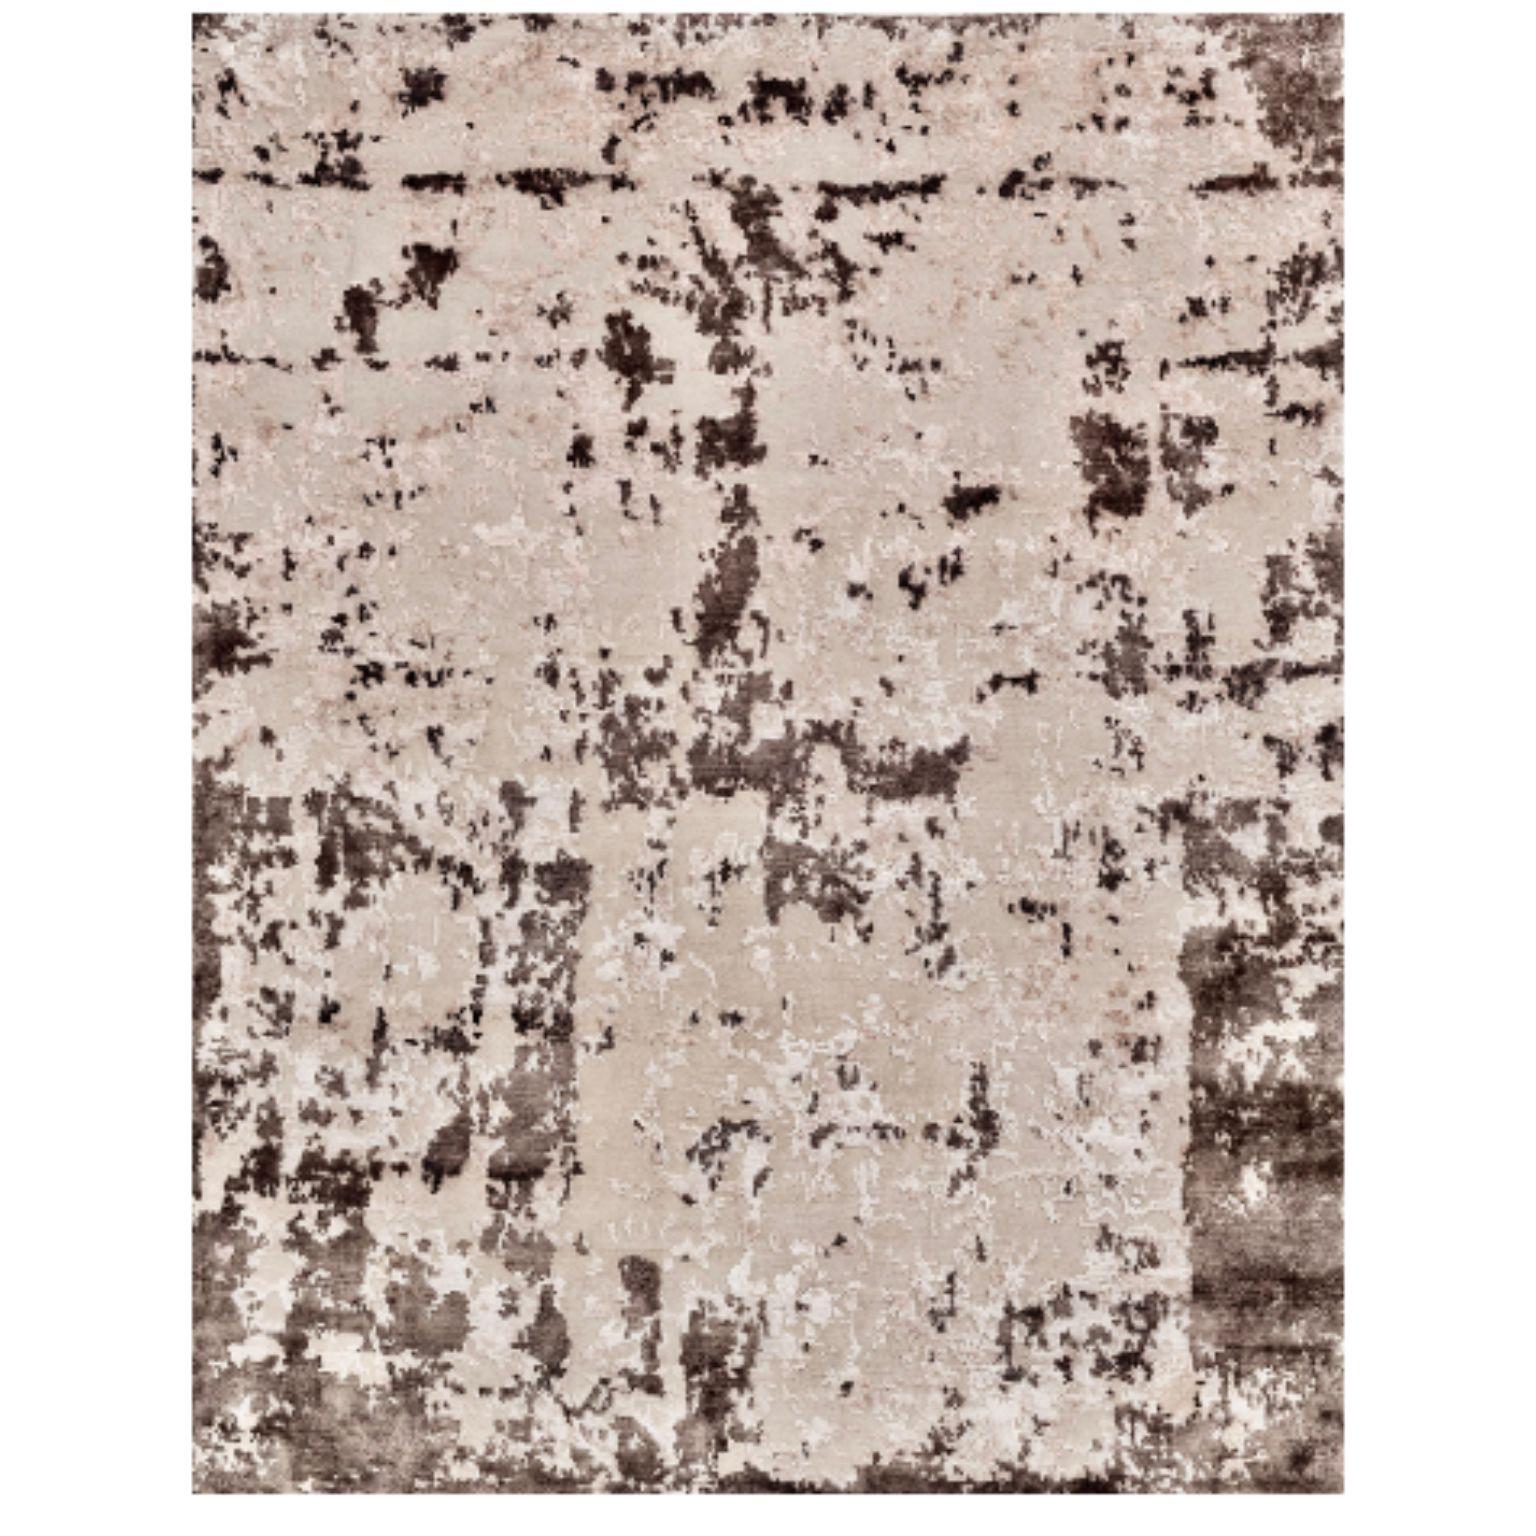 STORM 200 rug by Illulian
Dimensions: D300 x H200 cm 
Materials: Wool 50%, Silk 50%
Variations available and prices may vary according to materials and sizes.

Illulian, historic and prestigious rug company brand, internationally renowned in